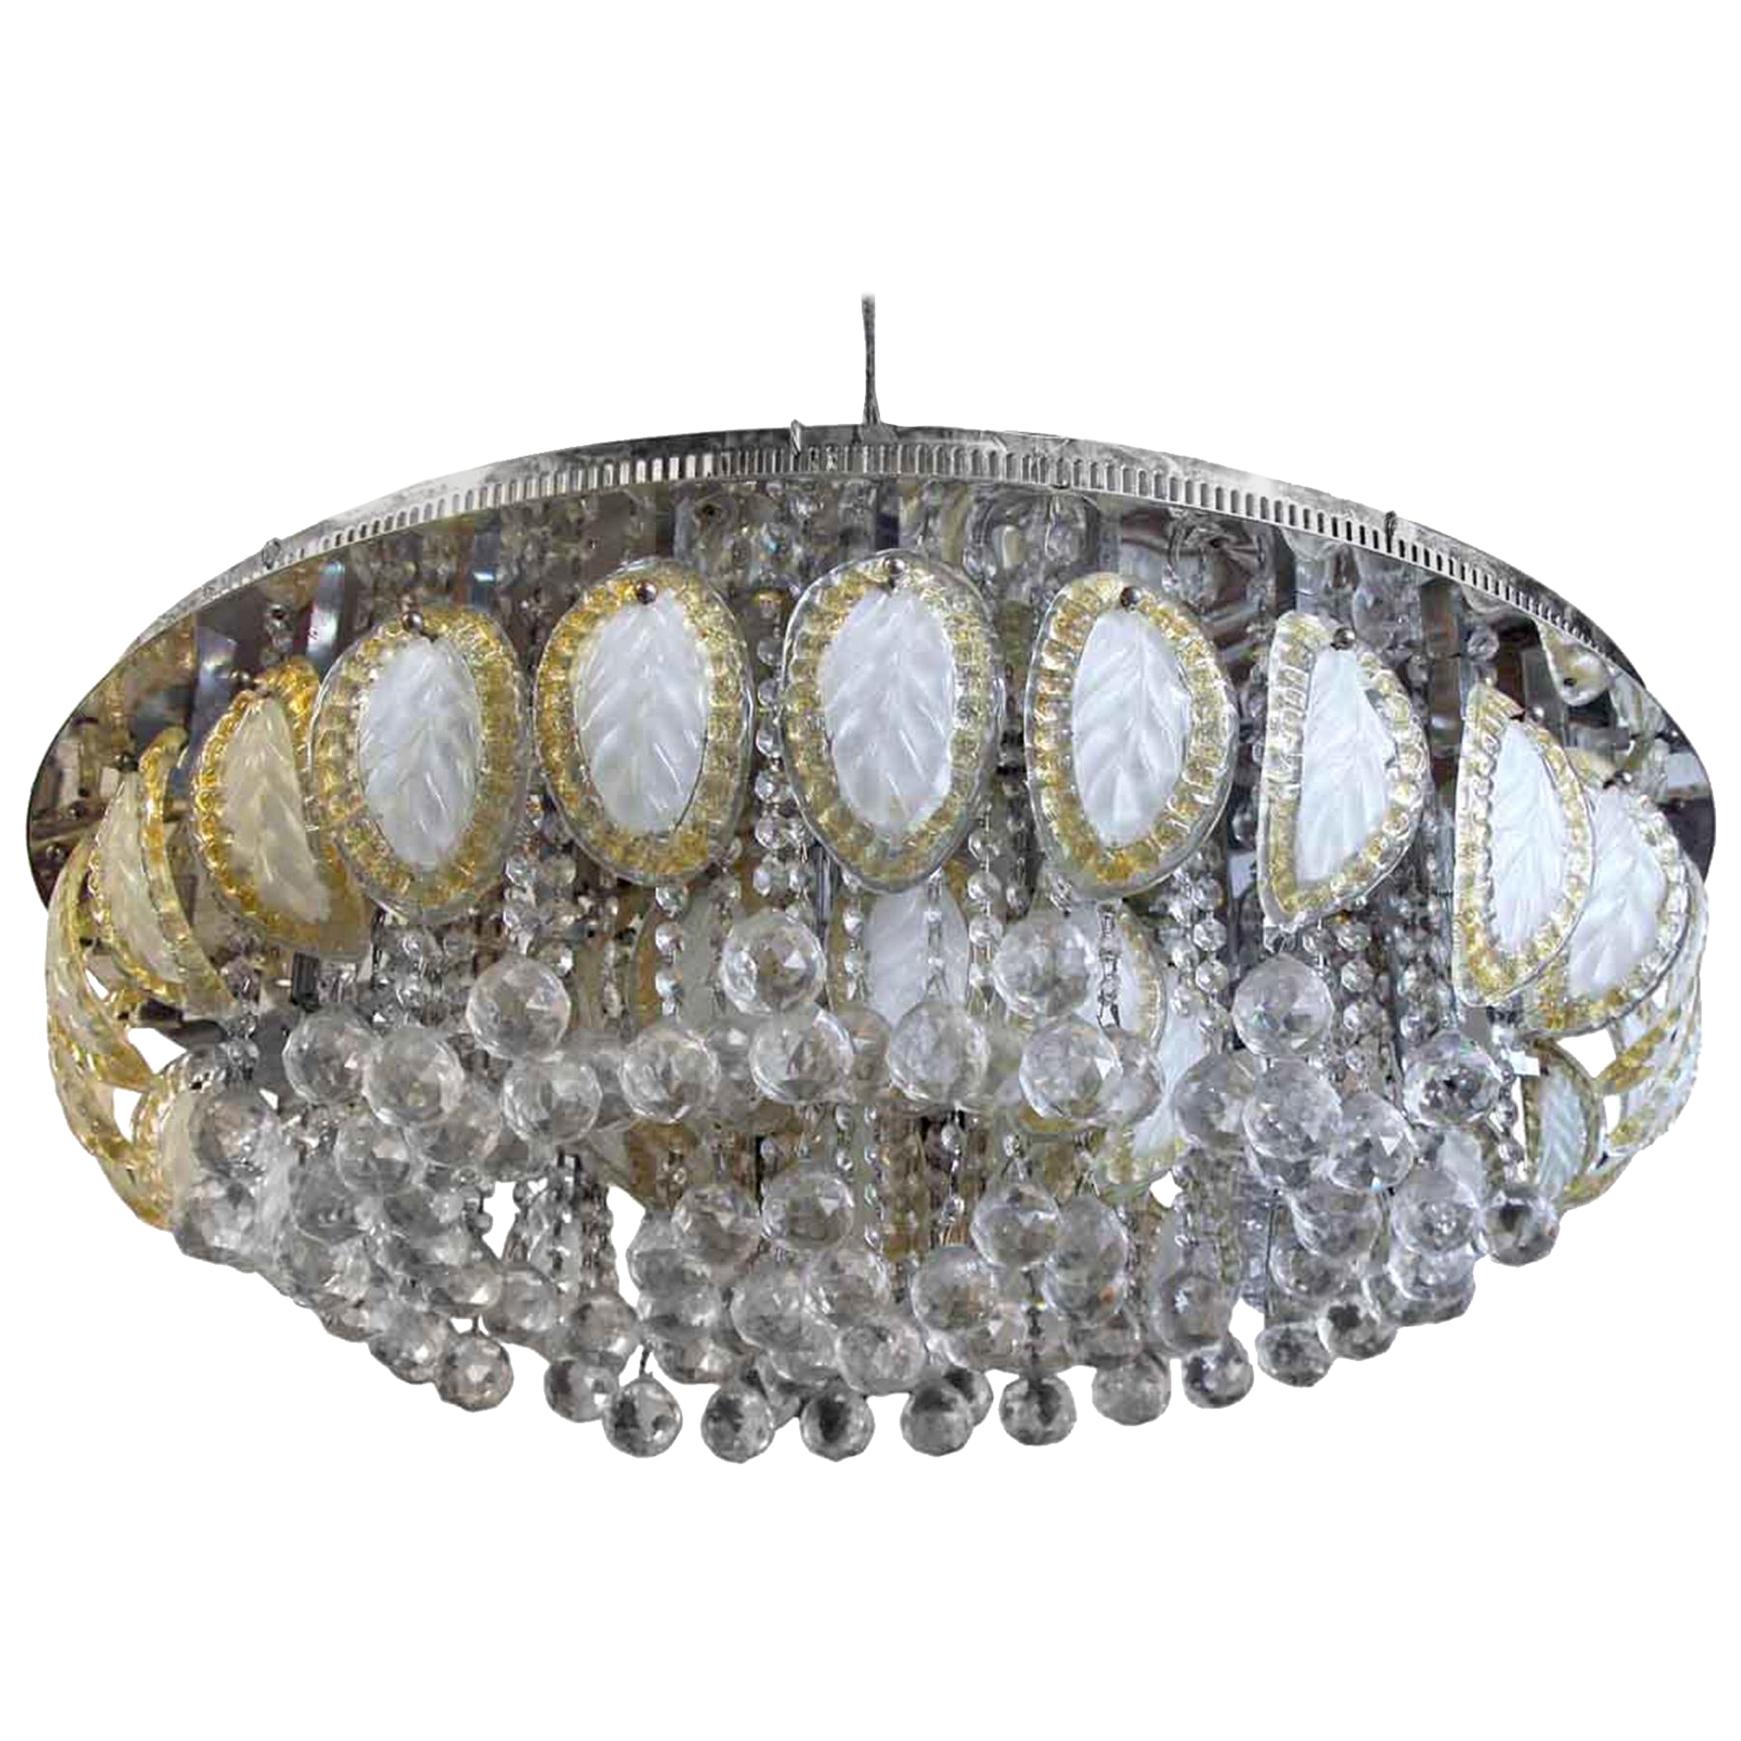 1960s Large Flush Mount Ballroom Chandelier with Glass Leaves a Faceted Crystals